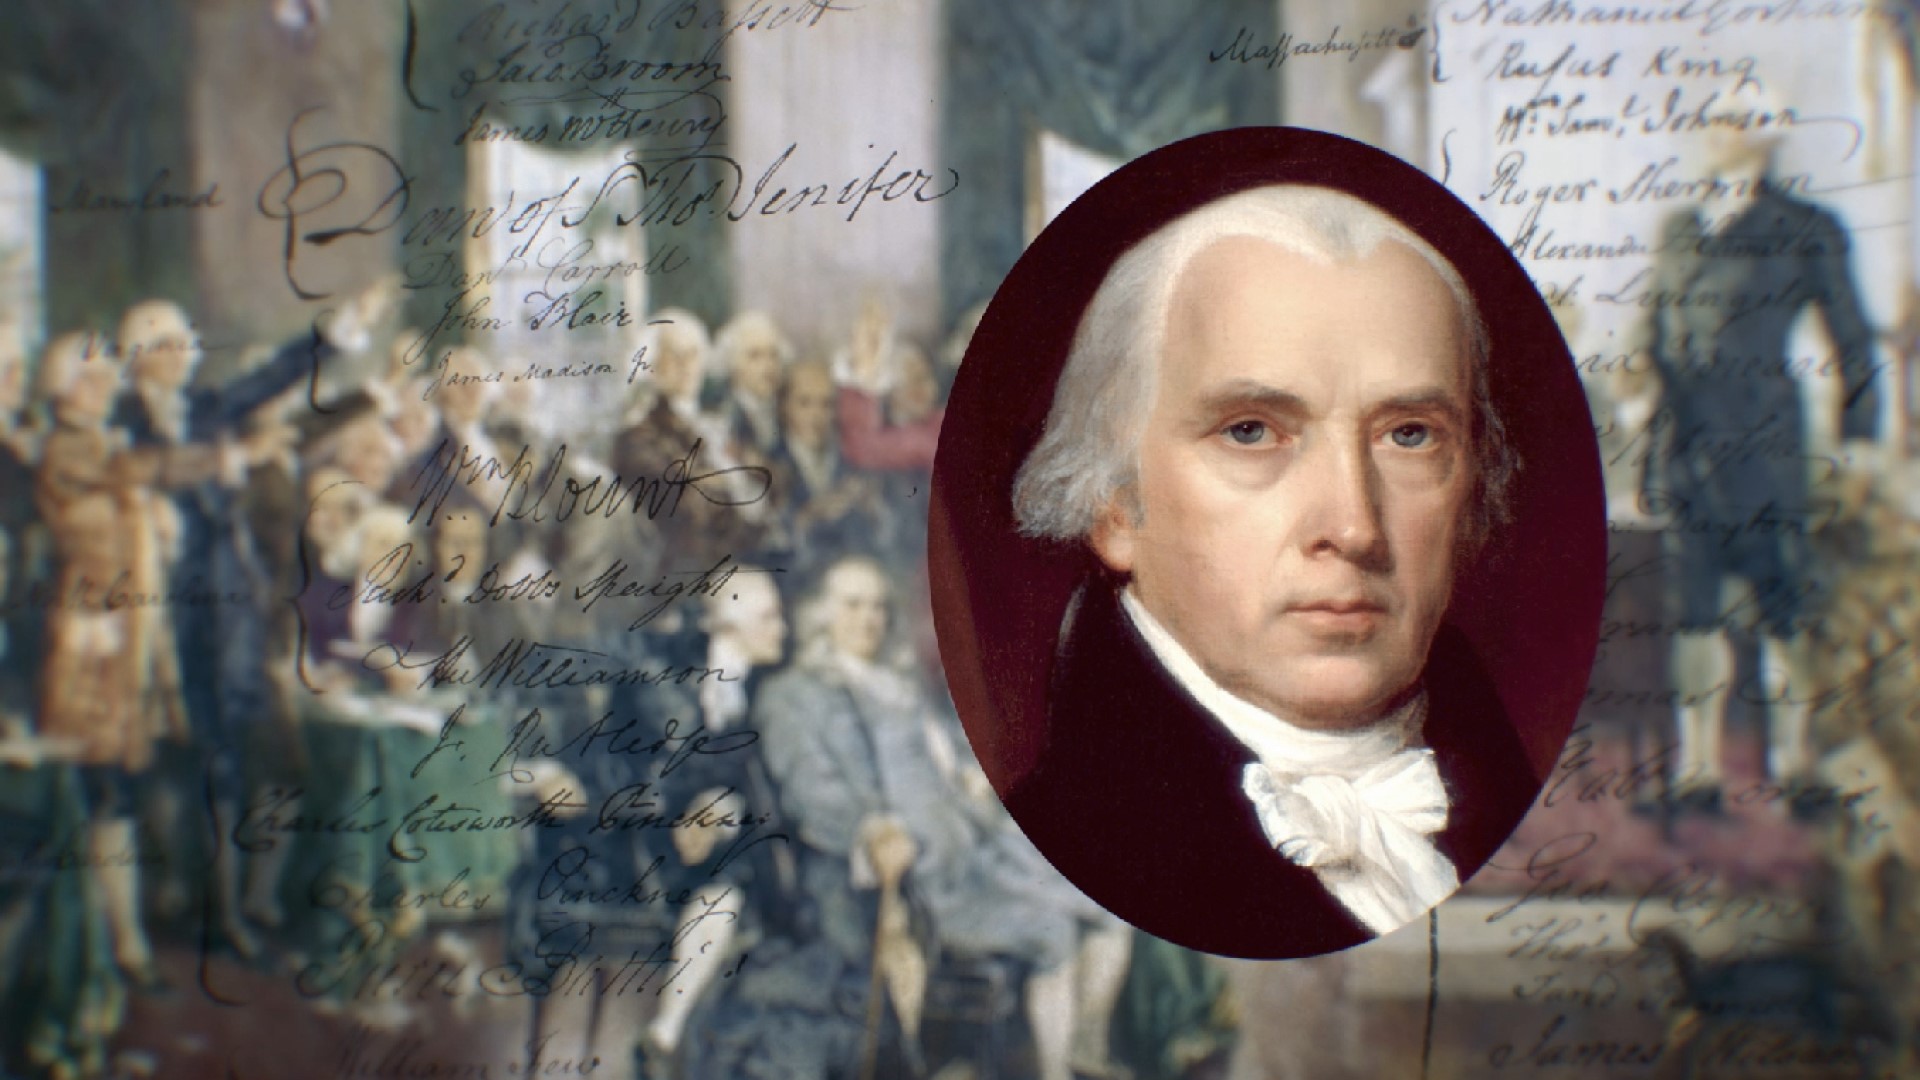 James Madison  Biography, Founding Father, Presidency